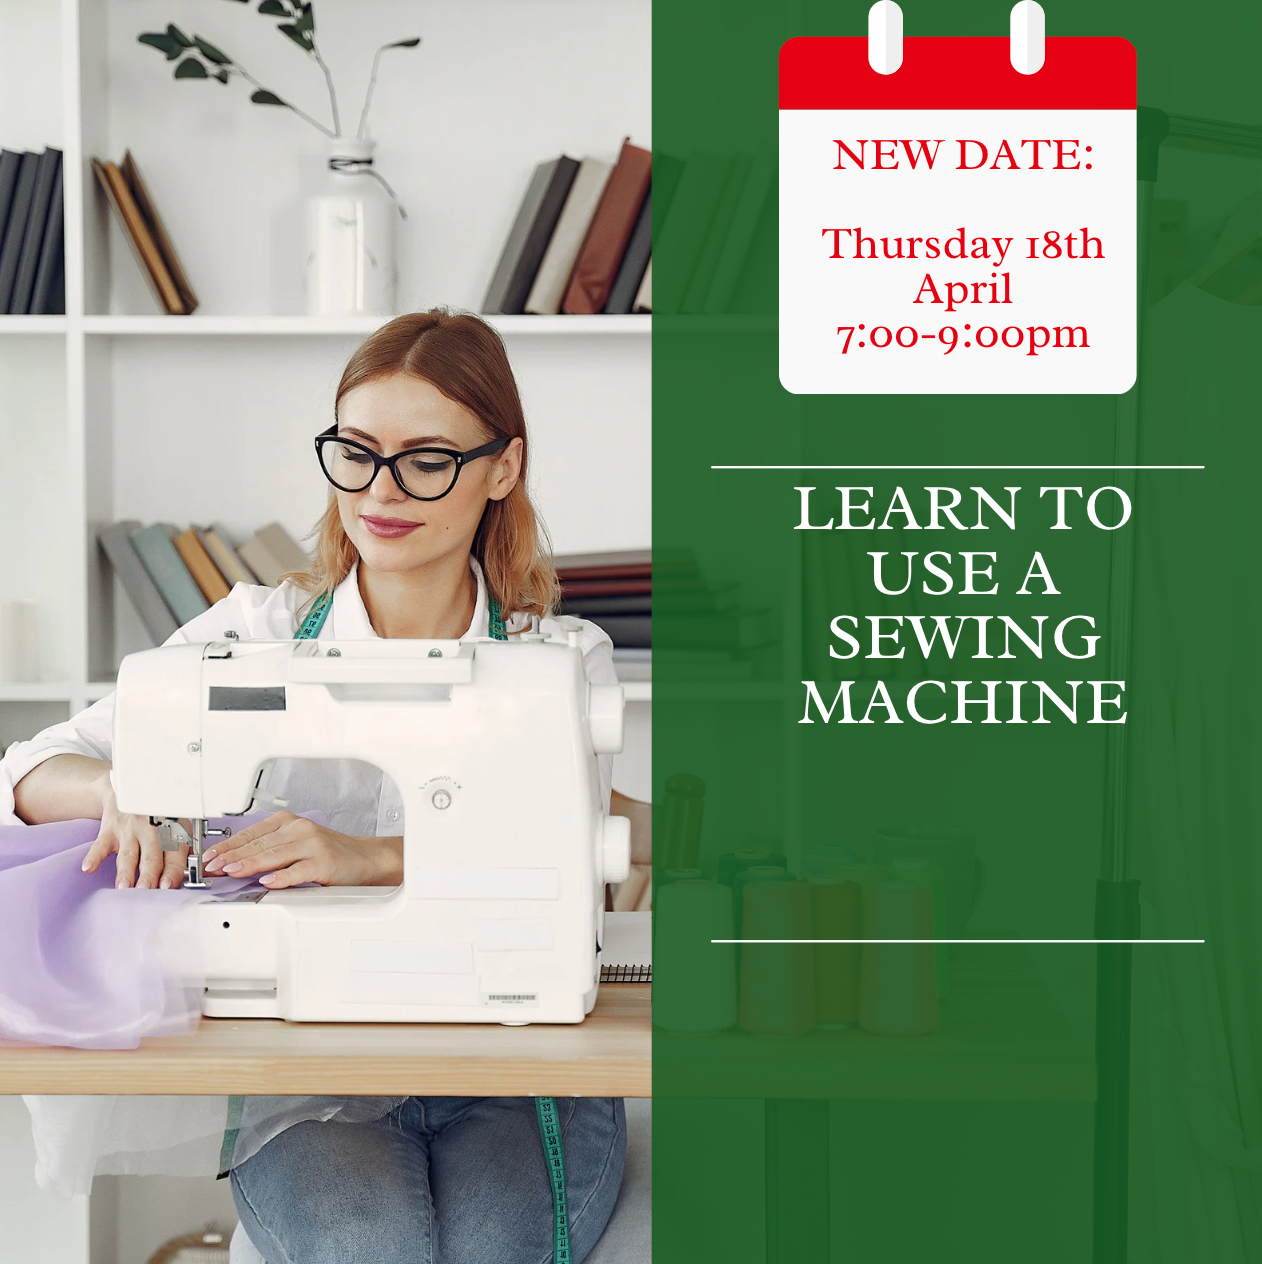 Learn To Use A Sewing Machine!
Thursday 18th April 7:00-9:00pm